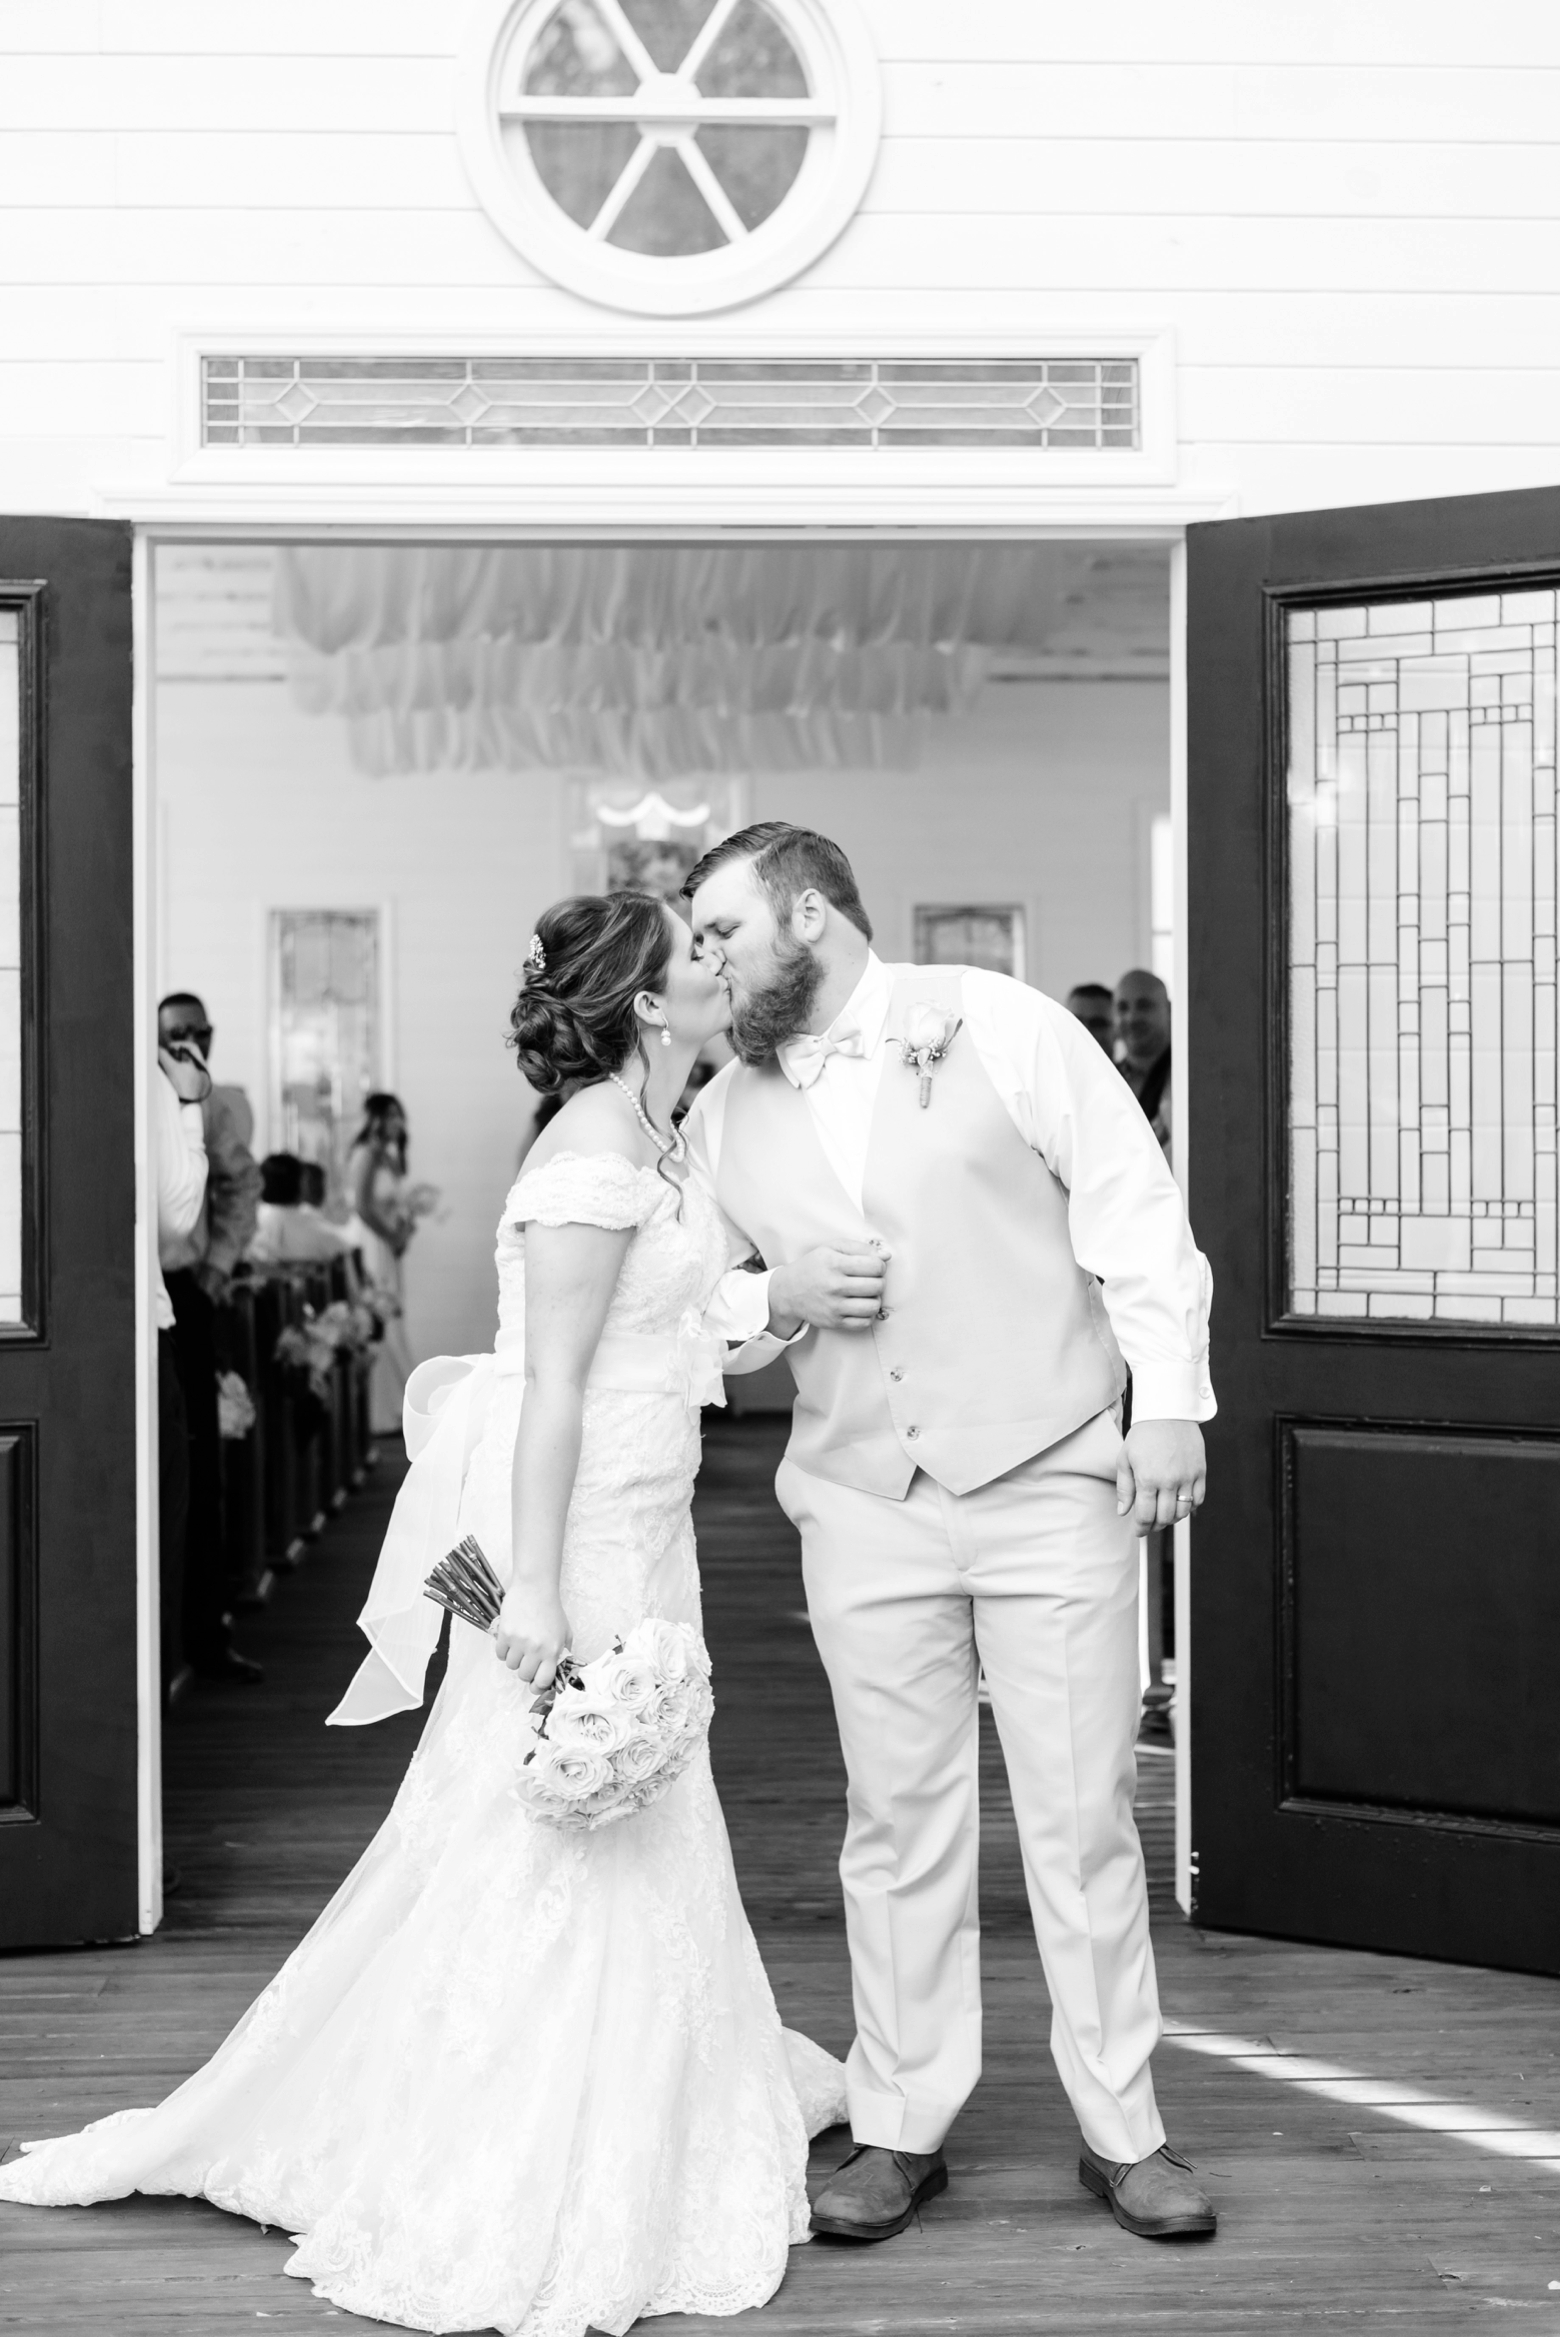 The Bride and Groom kiss after leaving the chapel after their cross creek wedding ceremony